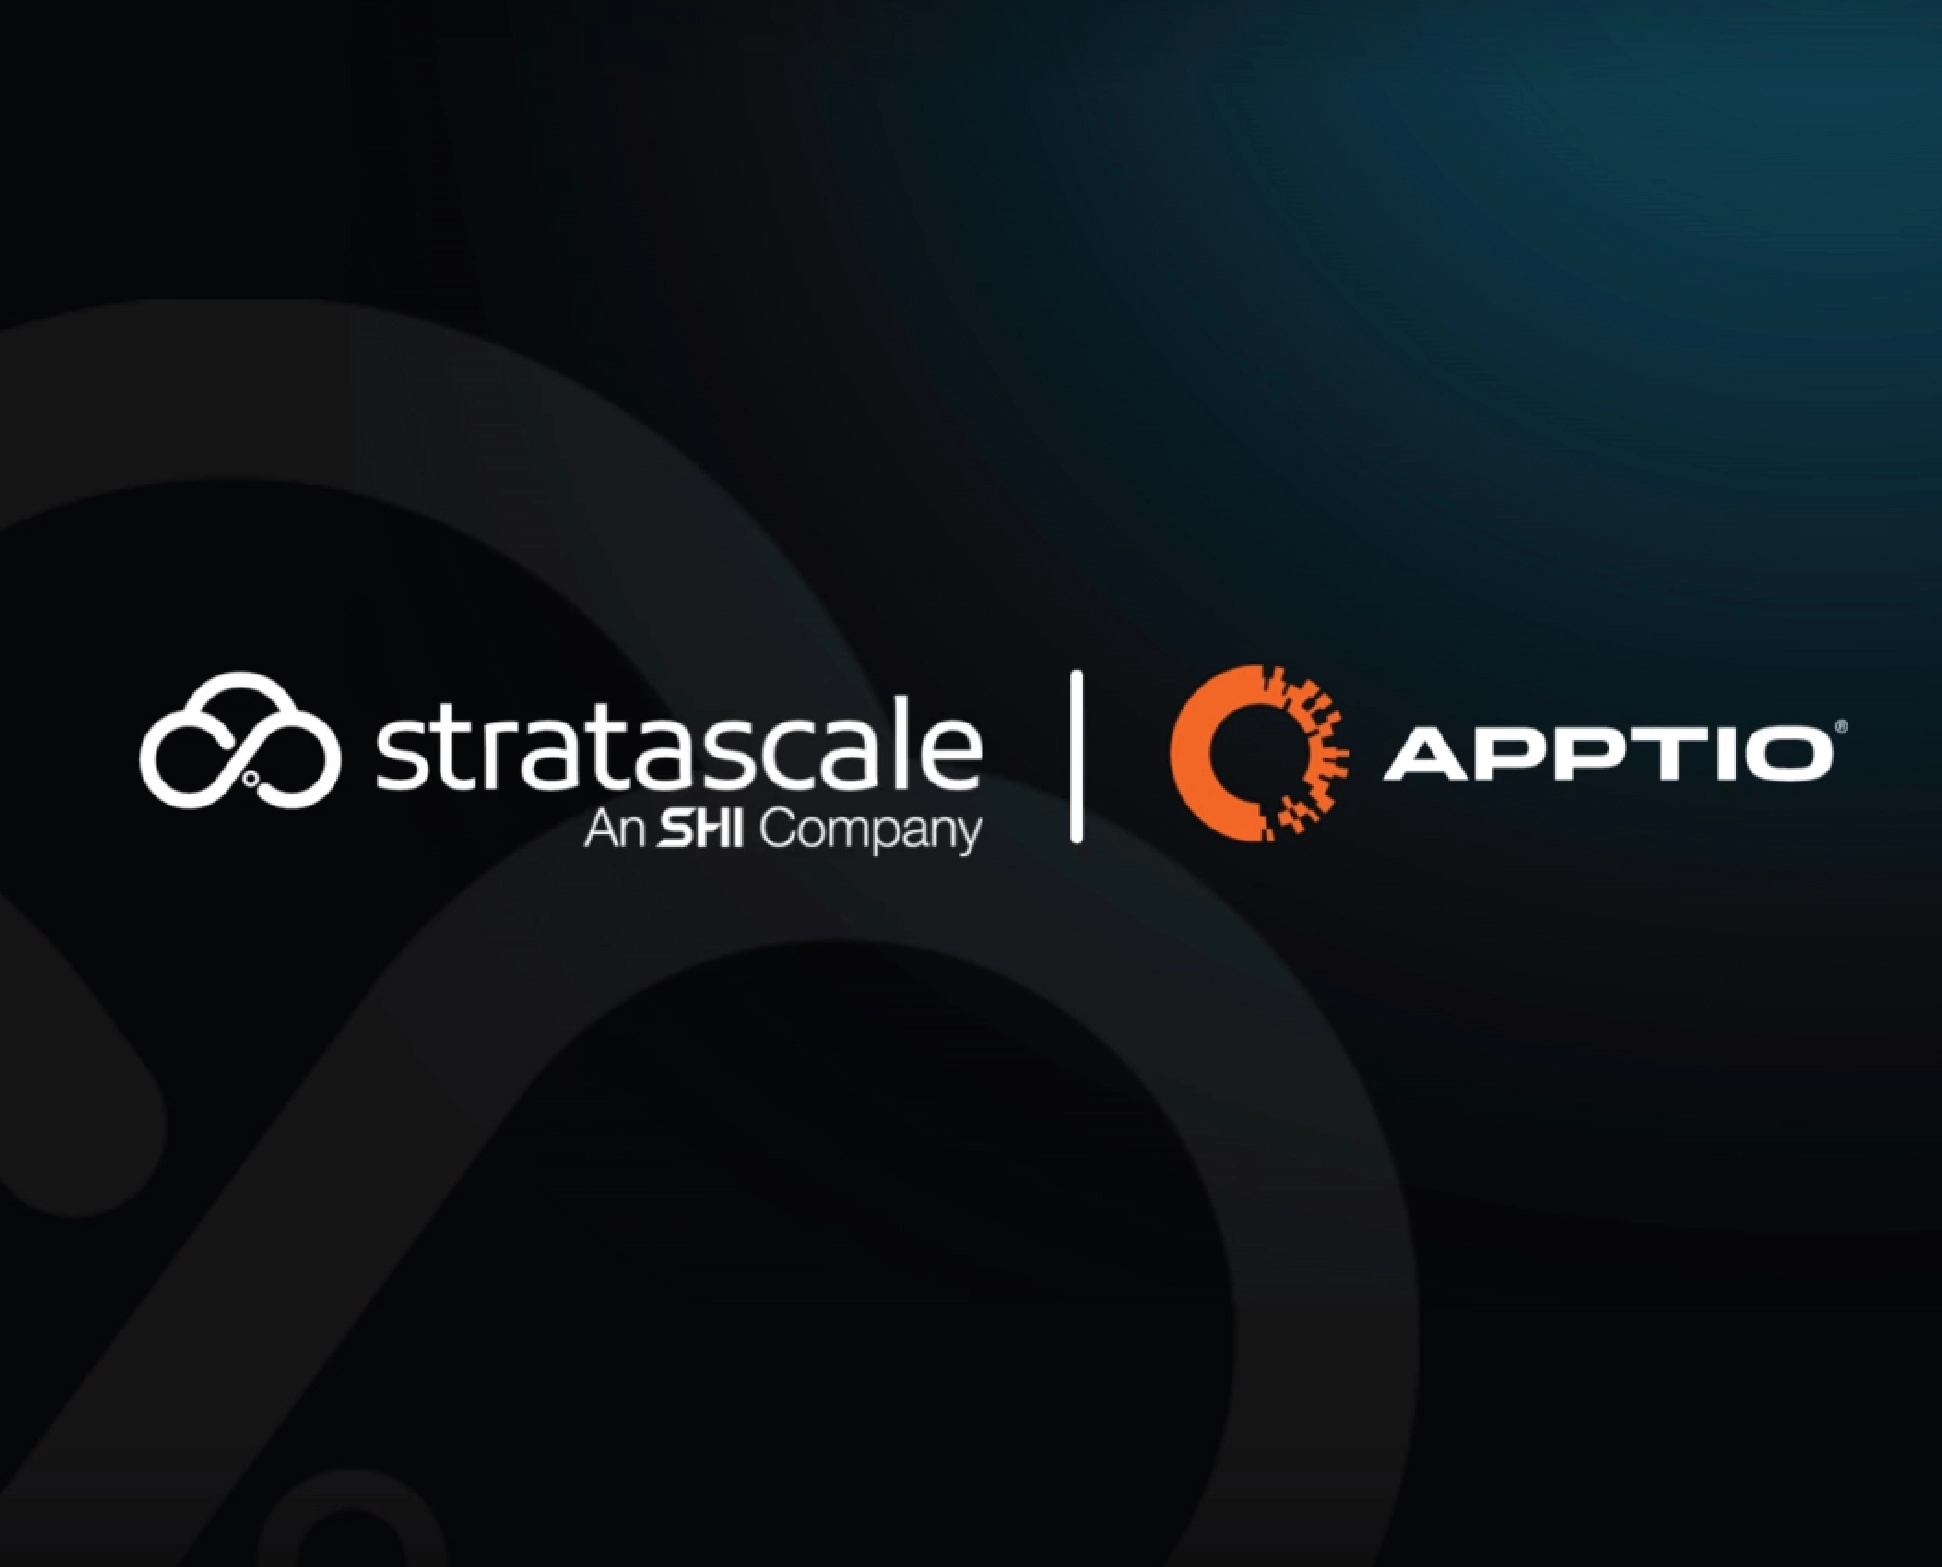 Stratascale and Apptio Partner to Deliver High-performance Hybrid Multi-cloud FinOps and GreenOps Solutions